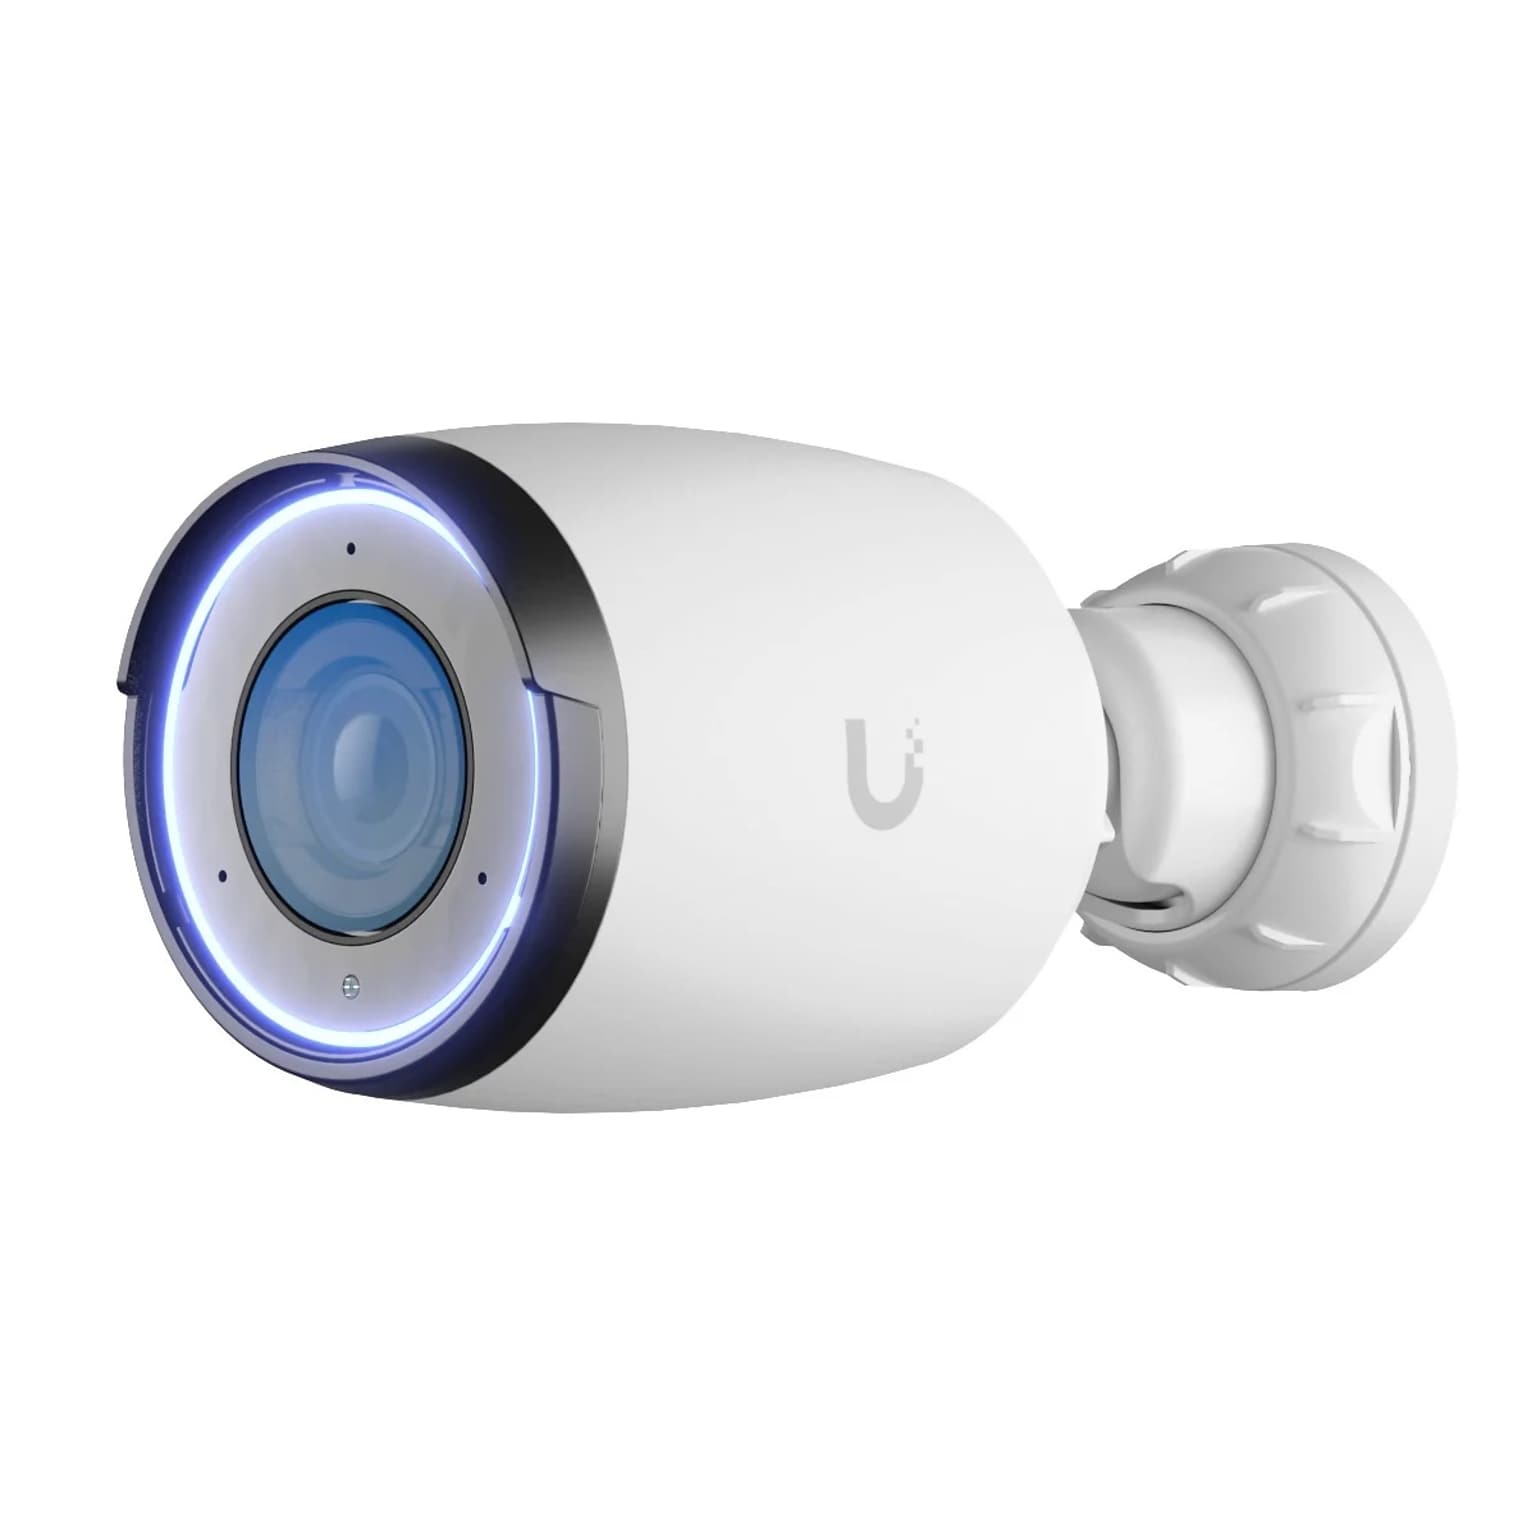 Ubiquiti Networks UniFi AI Professional Outdoor Network Bullet Camera with Night Vision, White (UVC-